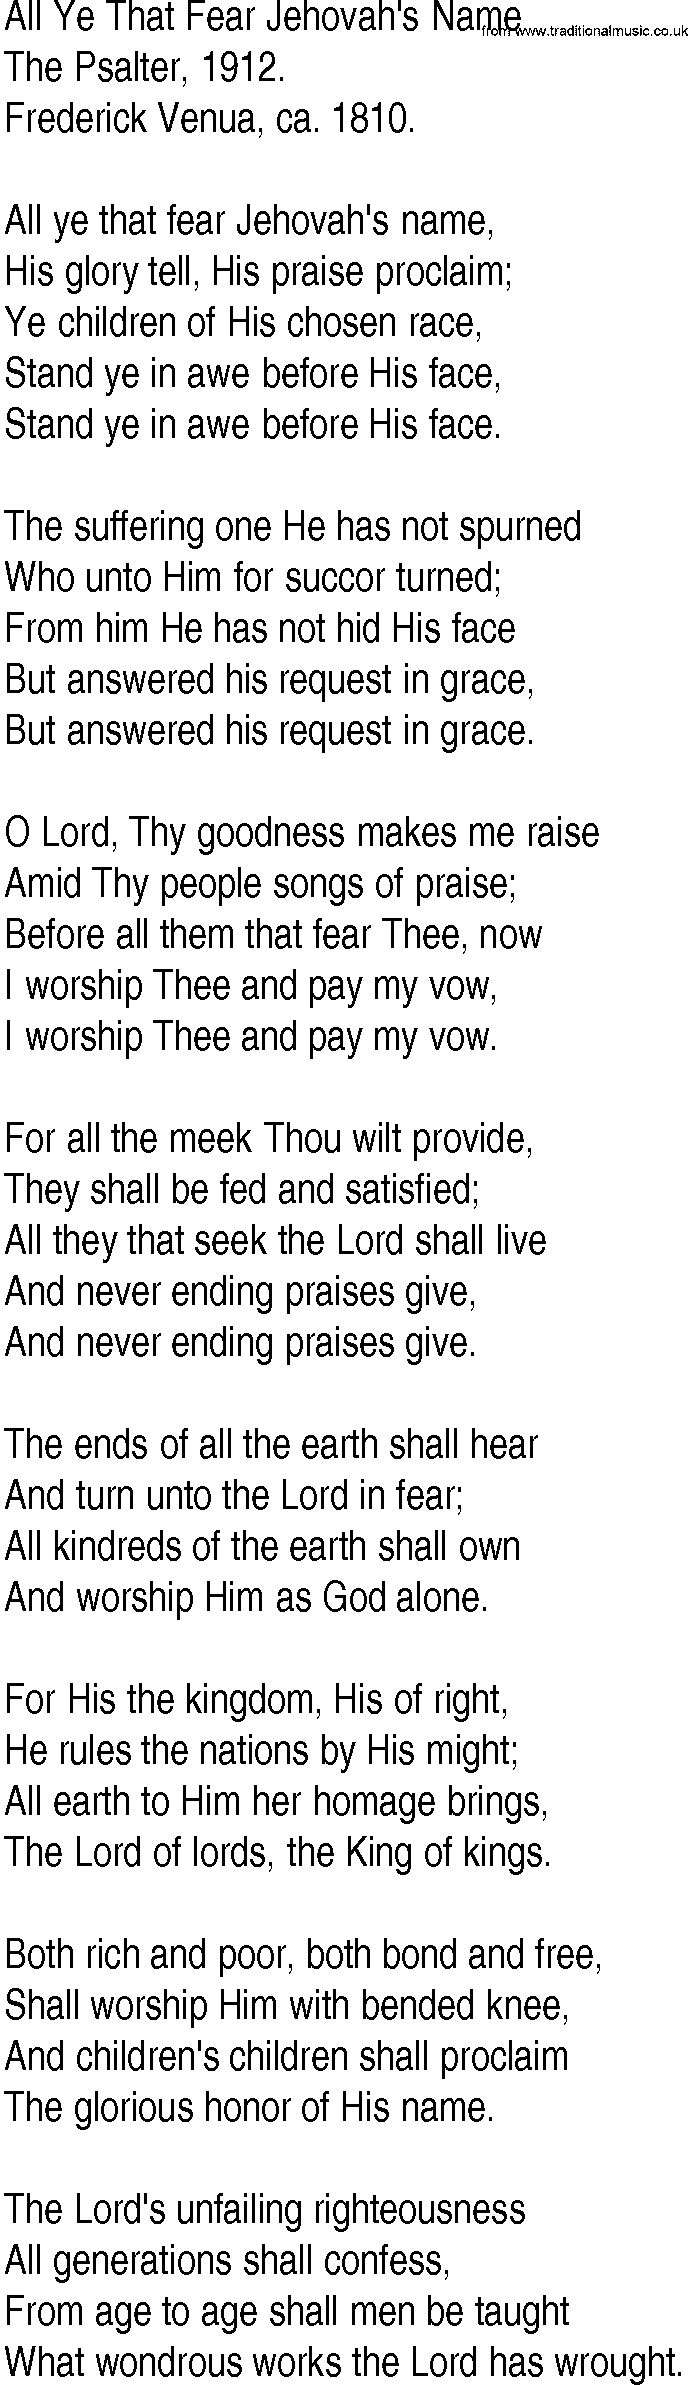 Hymn and Gospel Song: All Ye That Fear Jehovah's Name by The Psalter lyrics